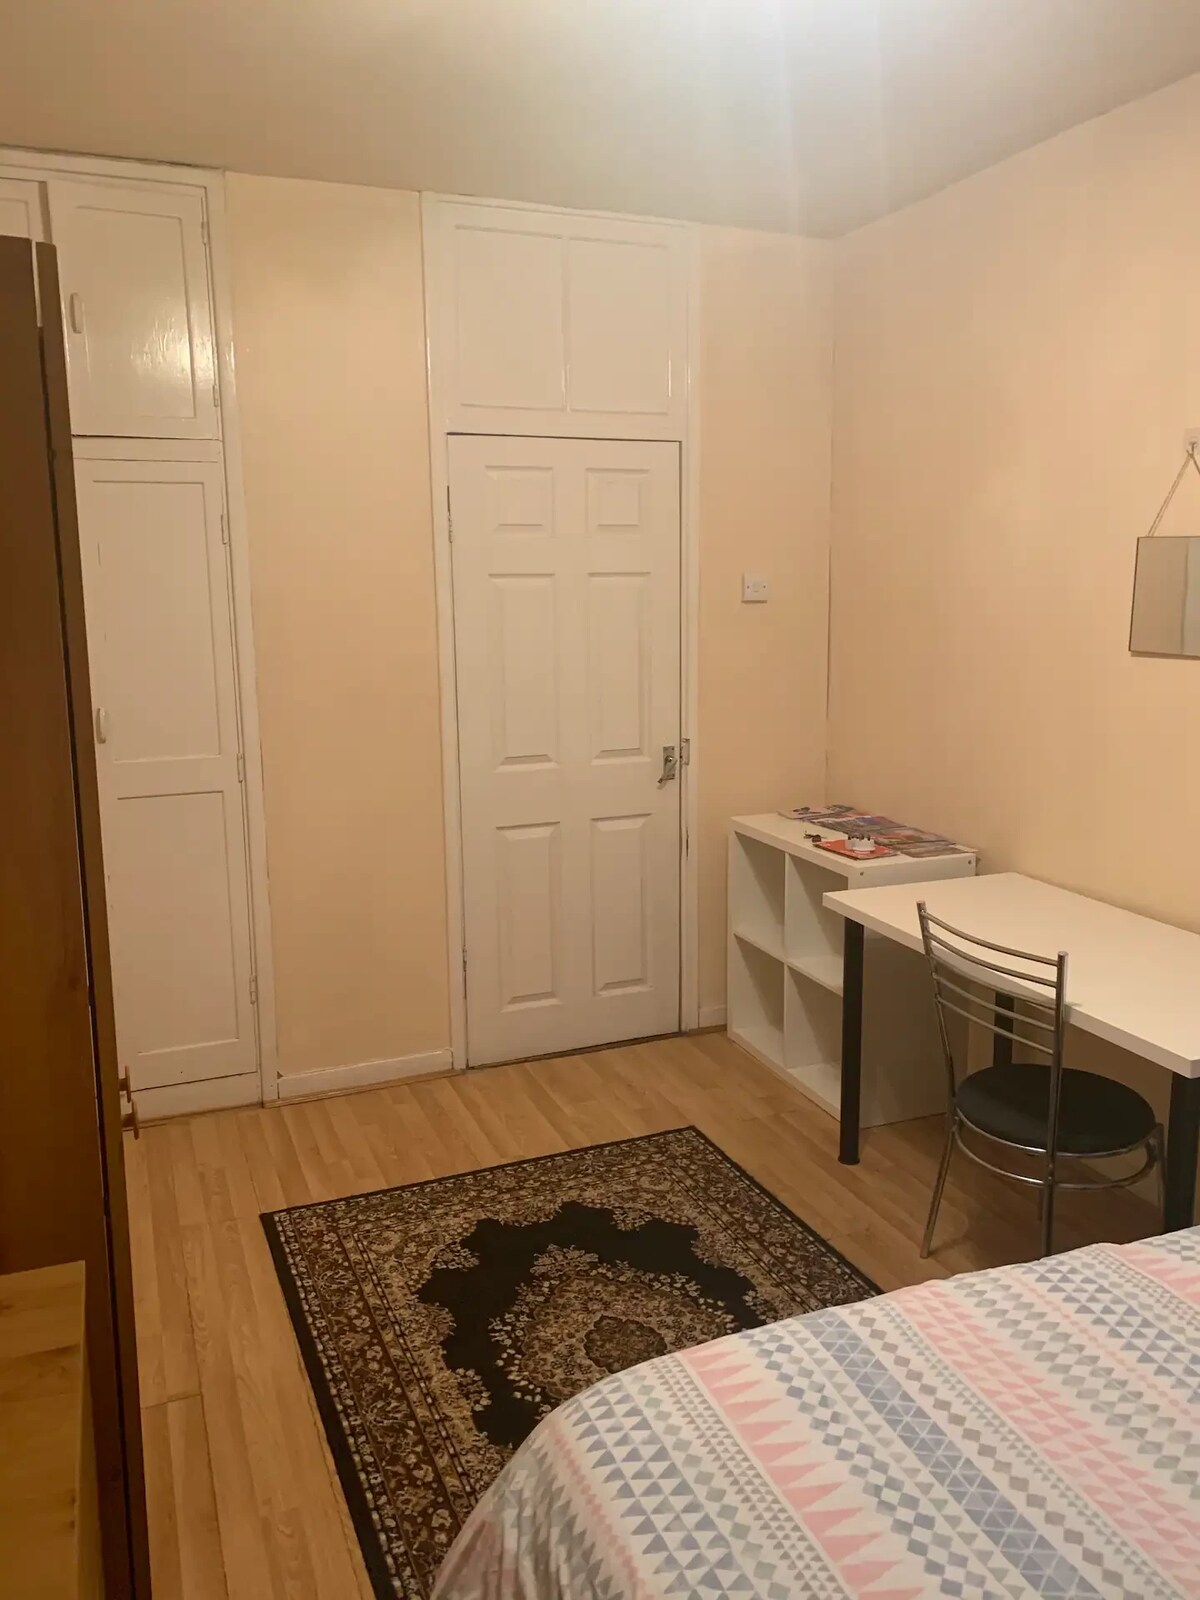 Large Room, Central
London